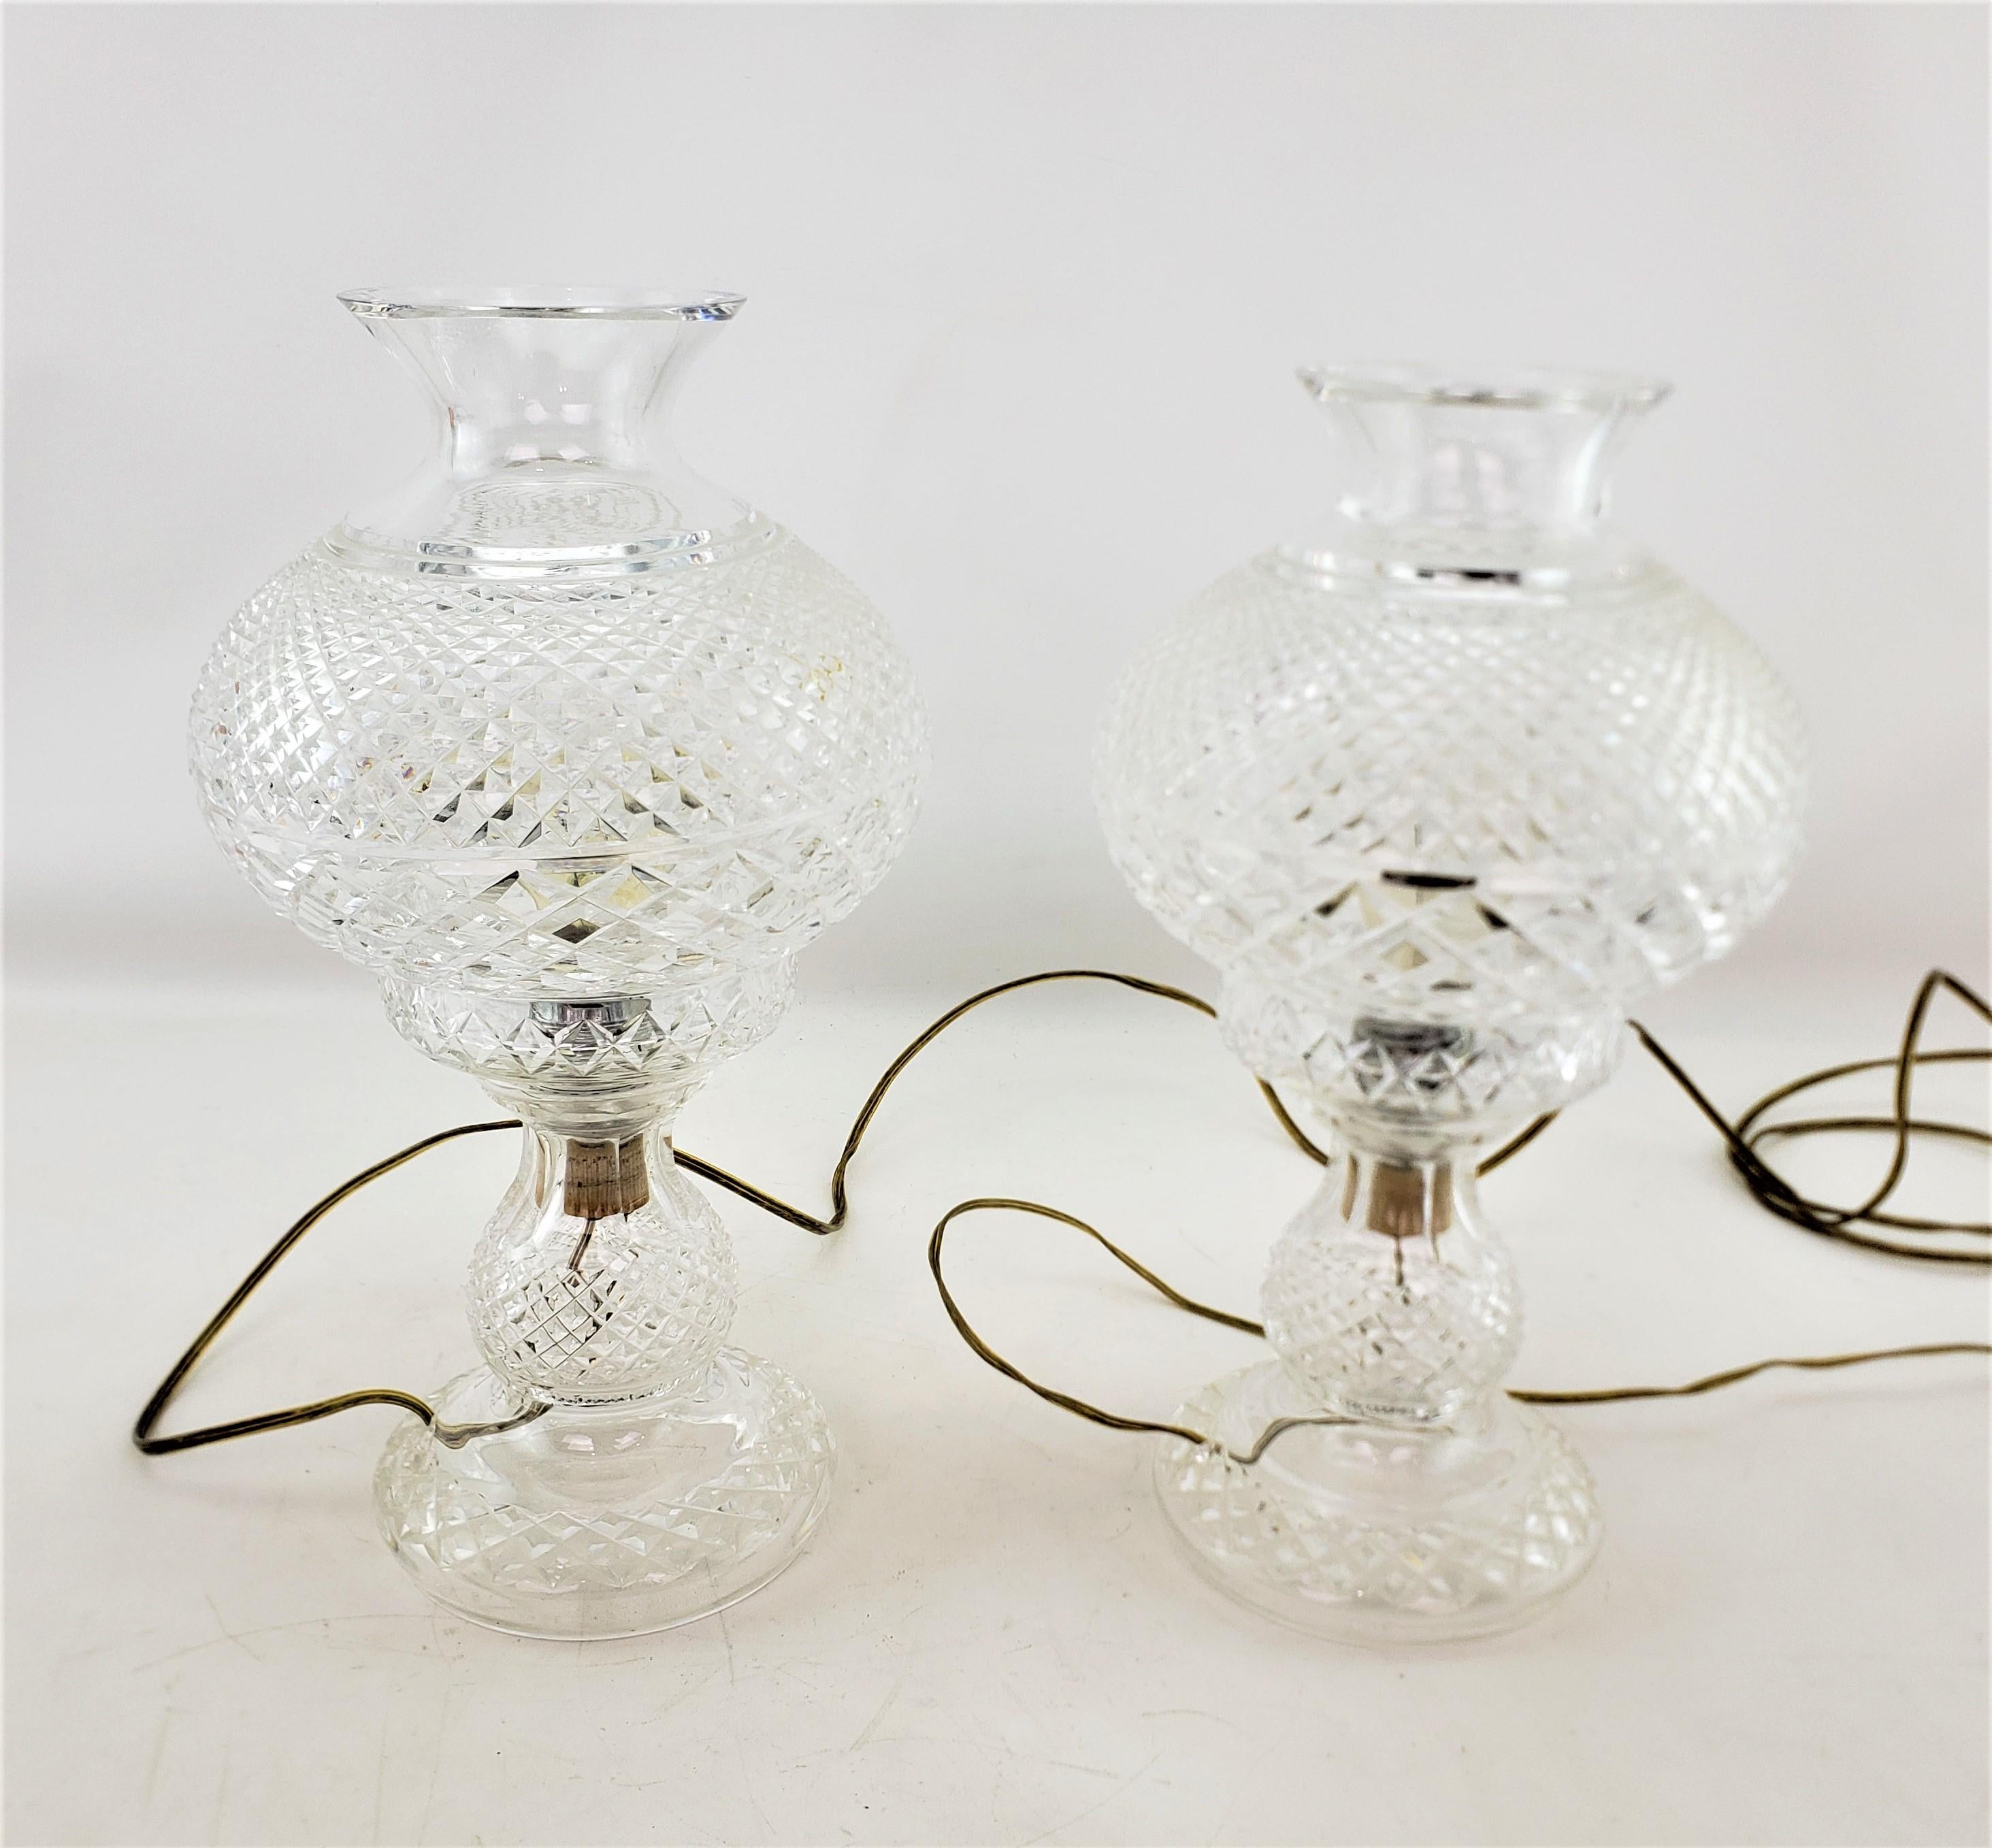 Pair of Antique Waterford Crystal Alana Inishmaan Hurricane Table Lamps In Good Condition For Sale In Hamilton, Ontario